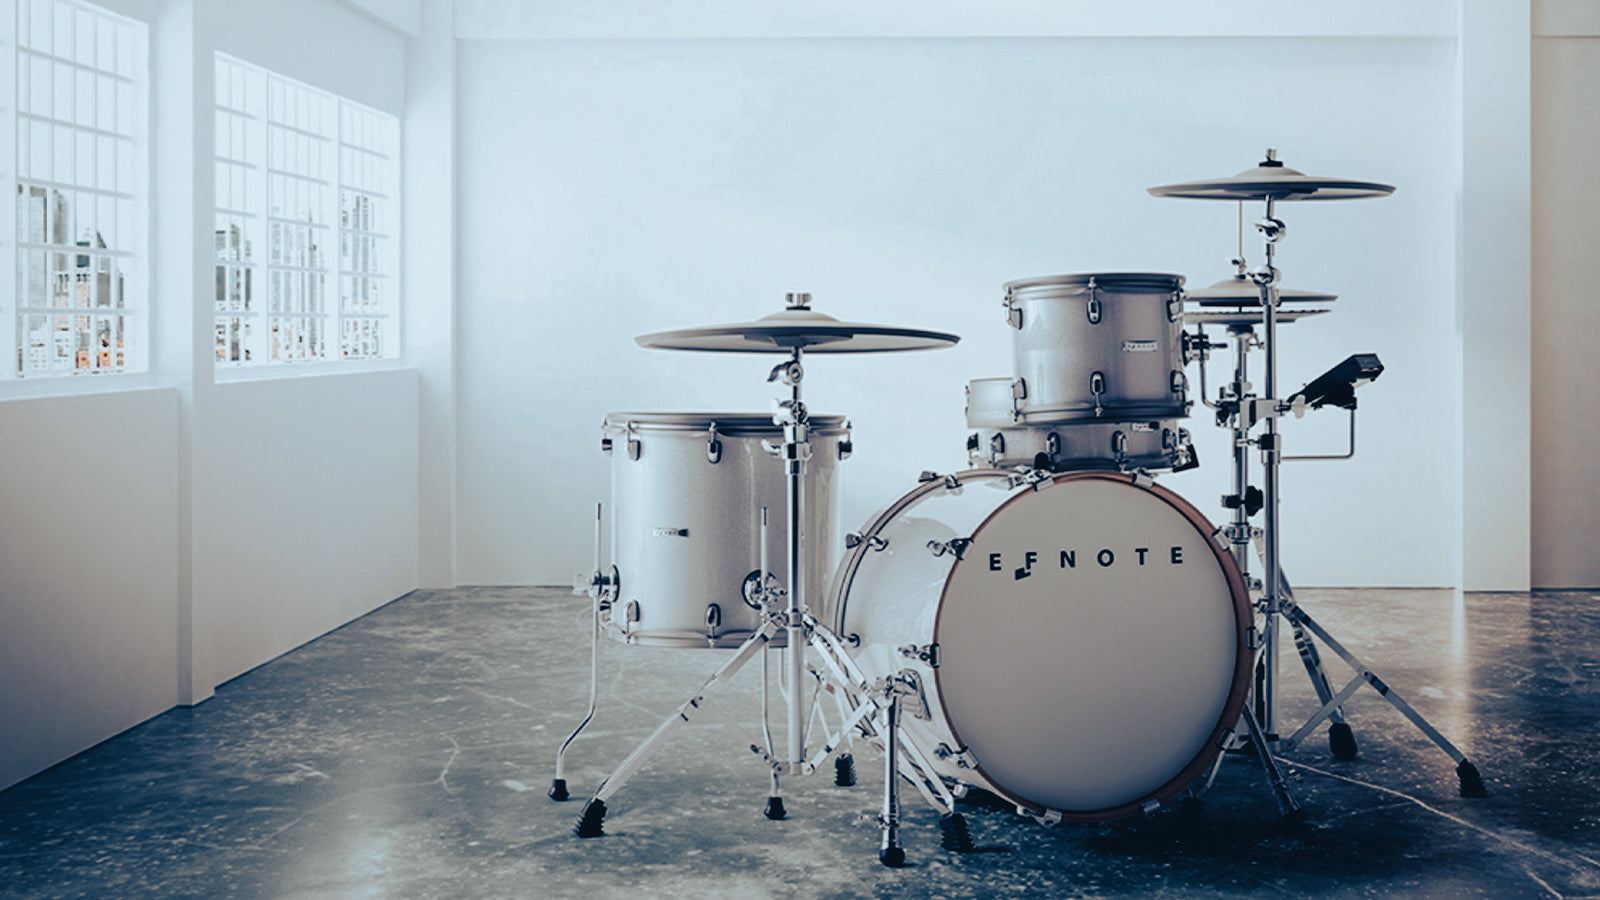 Efnote 7X drumset in a large commercial space